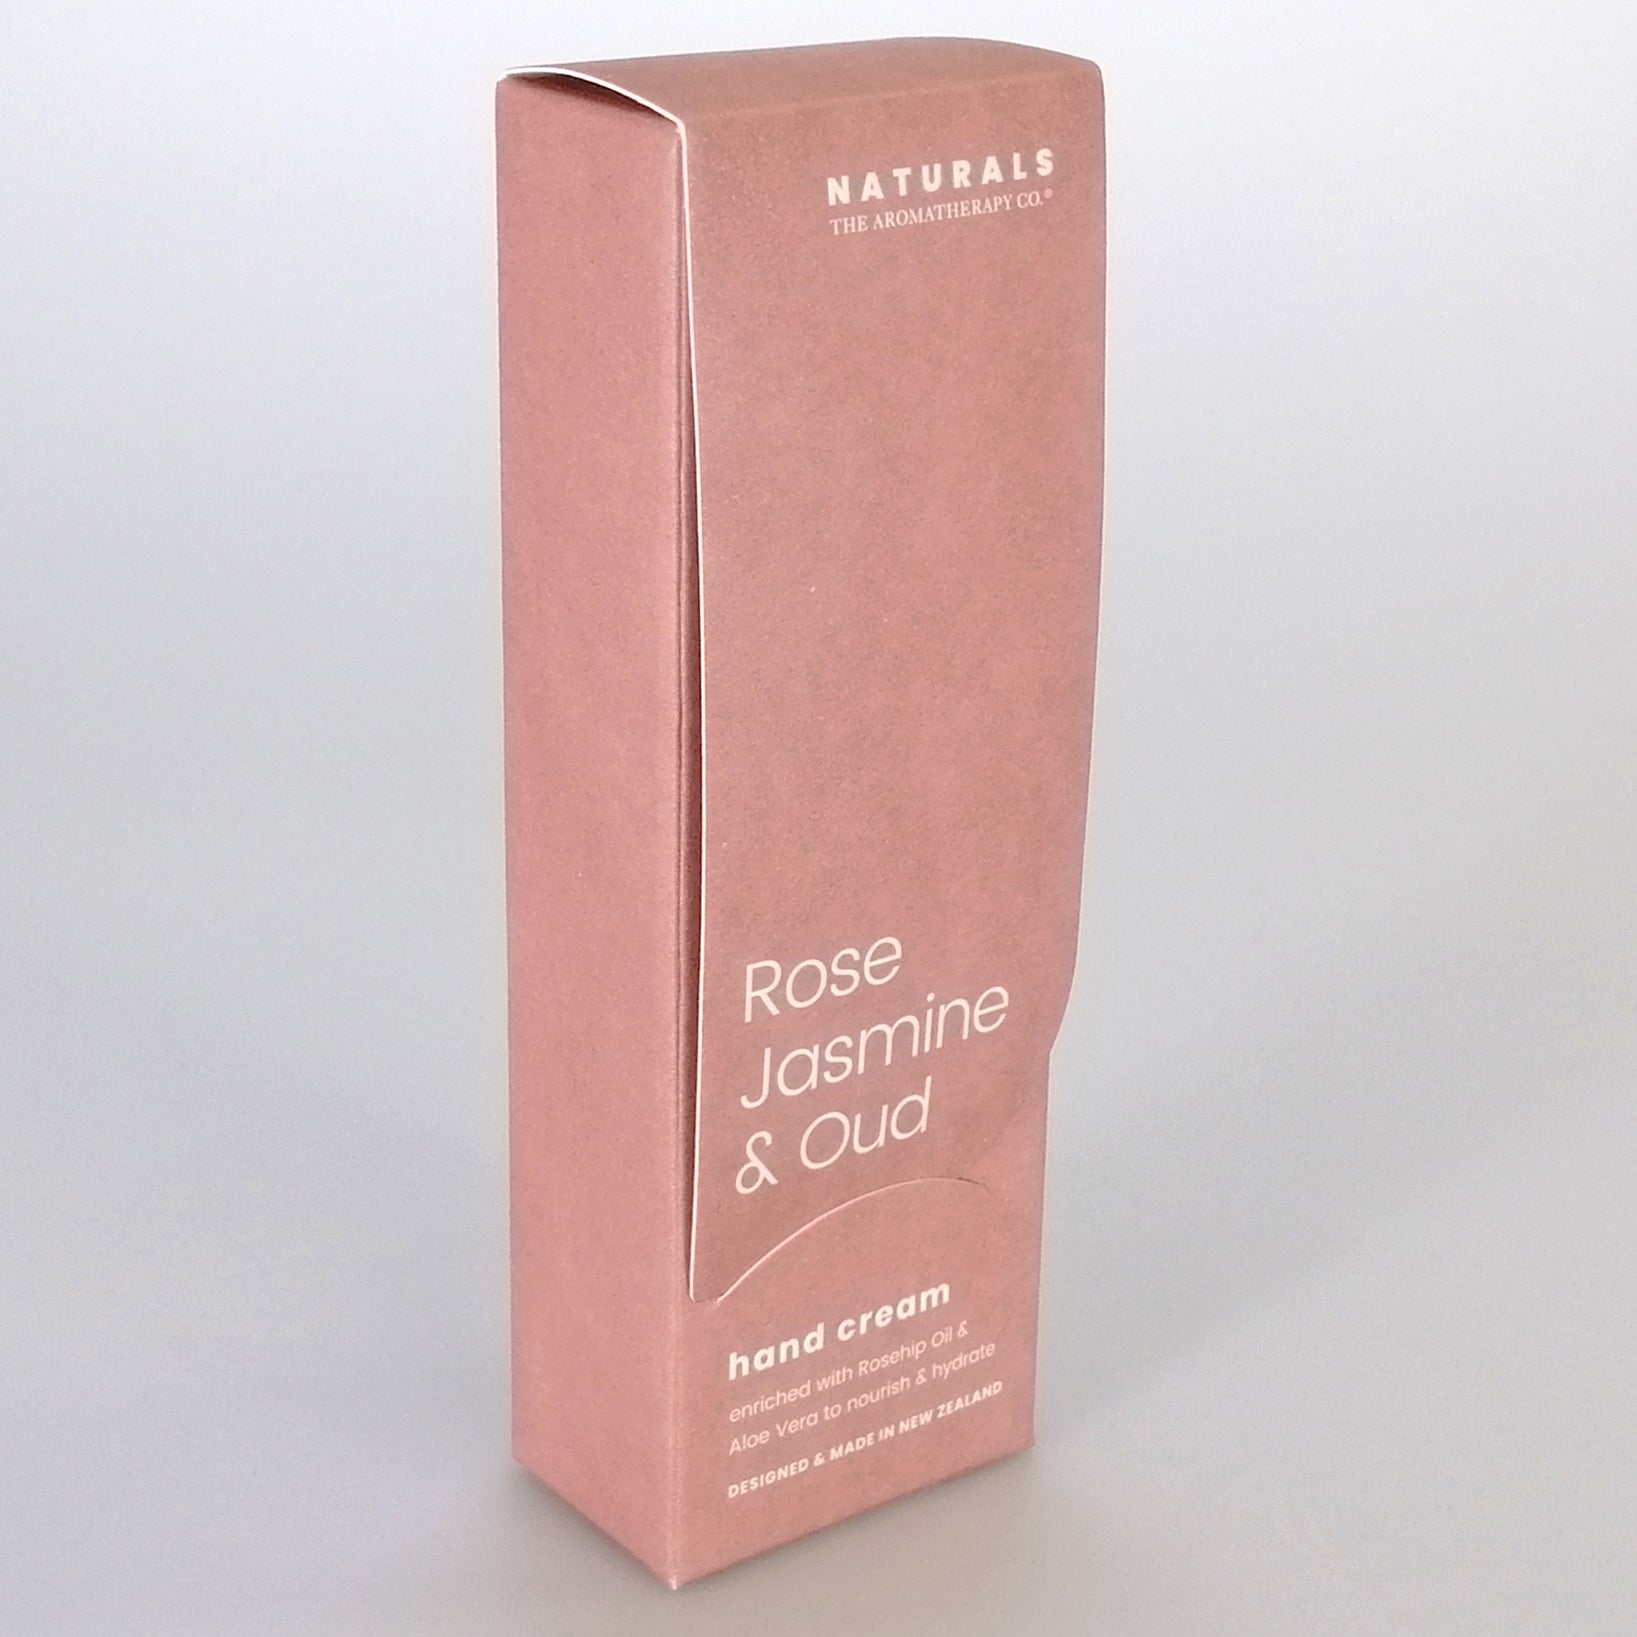 The Aromatherapy Co. Naturals - Rose Jasmine & Oud Hand Cream